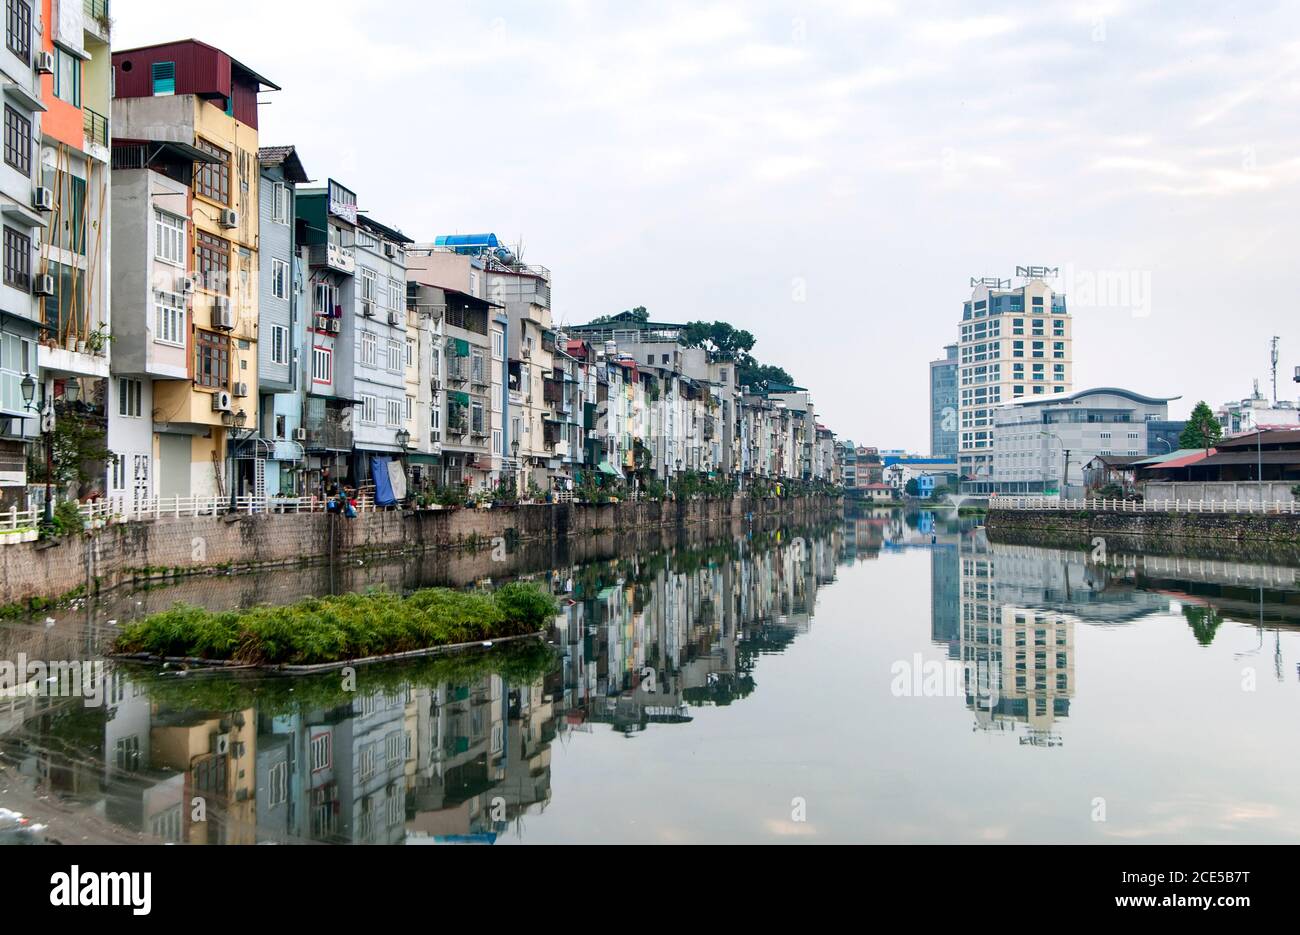 the beauty of landscapes and people, urban landscape, Hanoi capital, Vietnam Stock Photo